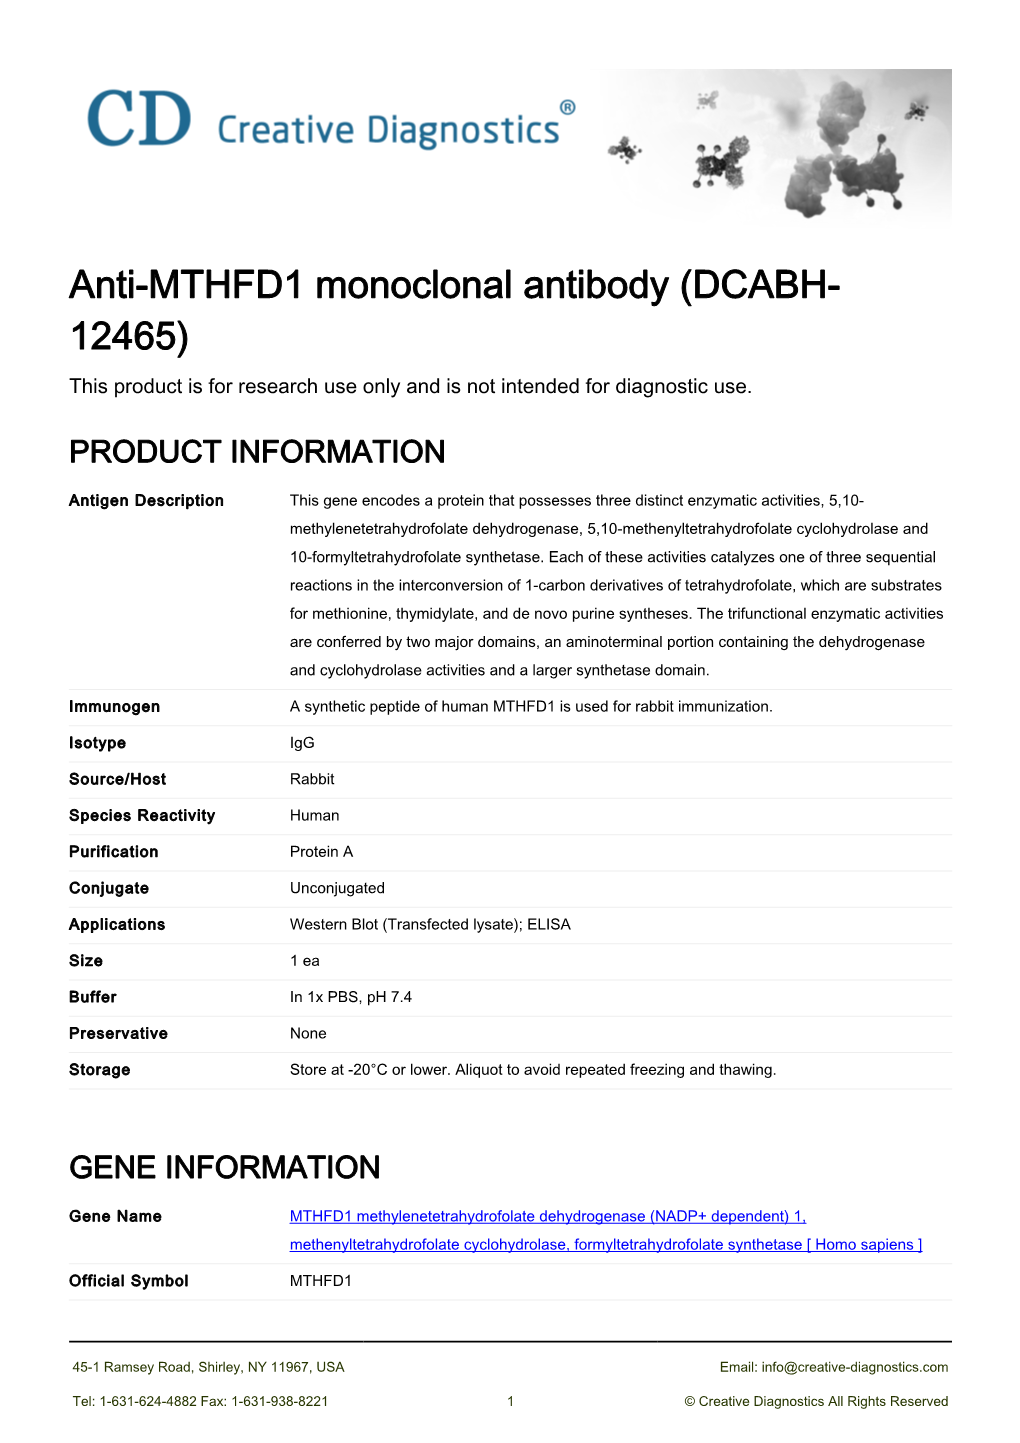 Anti-MTHFD1 Monoclonal Antibody (DCABH- 12465) This Product Is for Research Use Only and Is Not Intended for Diagnostic Use